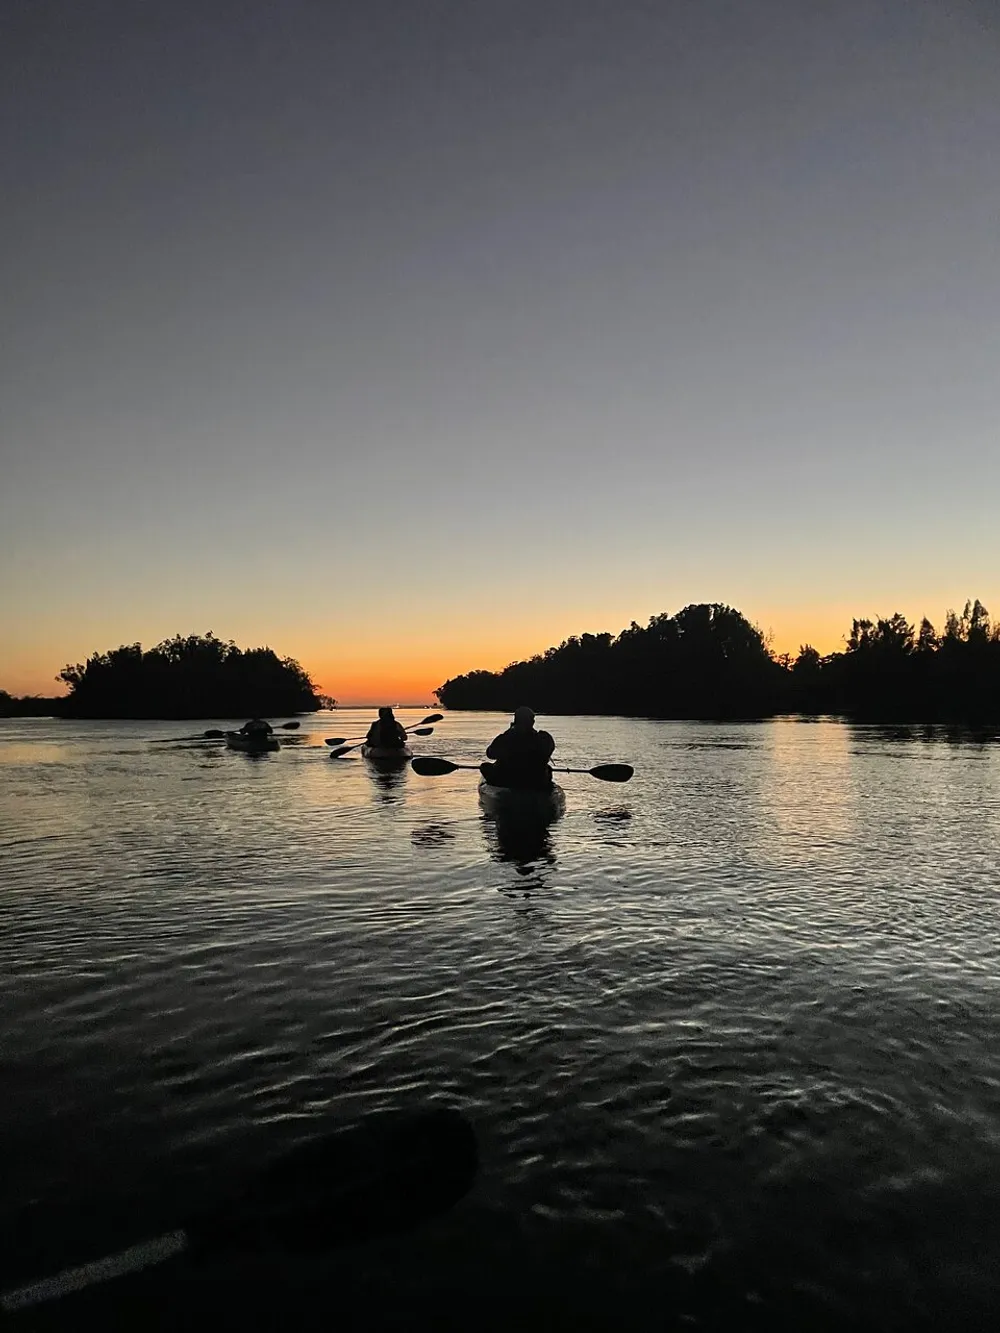 A group of kayakers paddles on calm water under a twilight sky